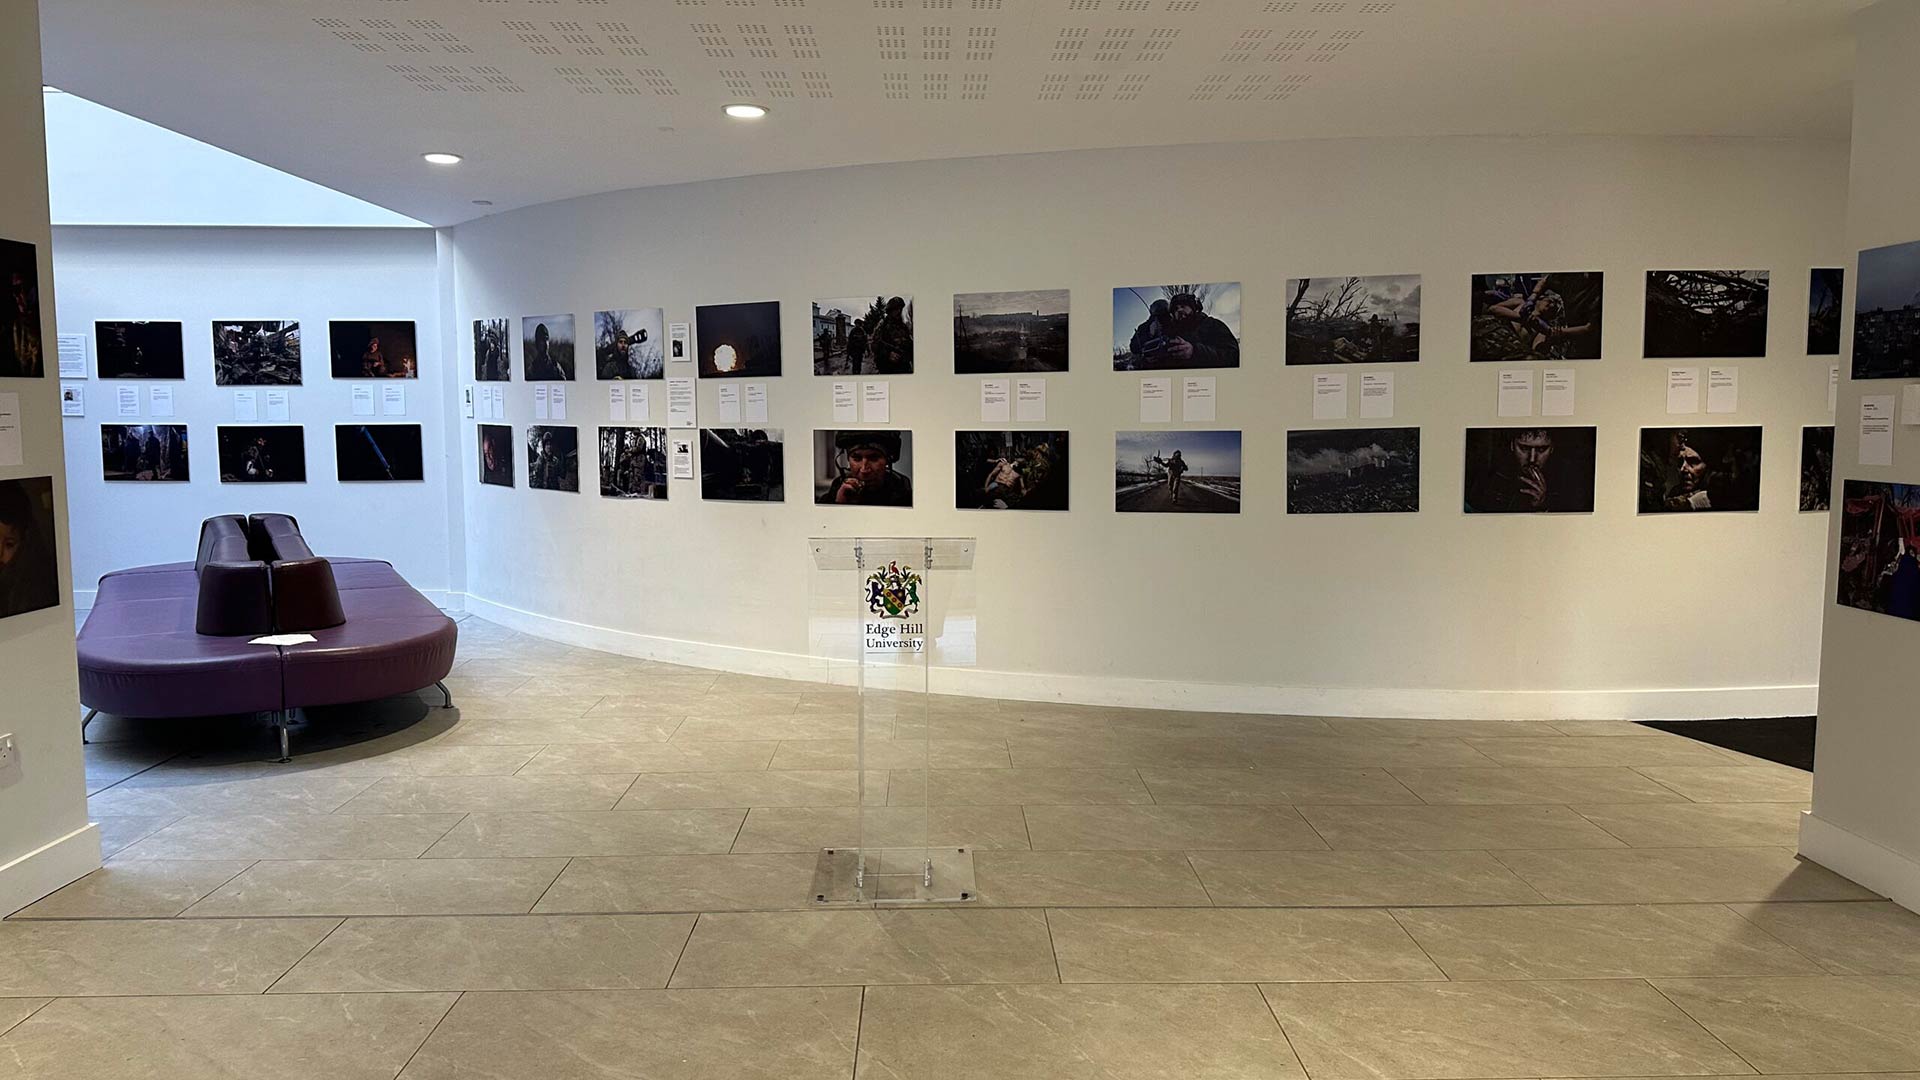 A view of the Ukraine war photo exhibition taking place at Edge Hill University.